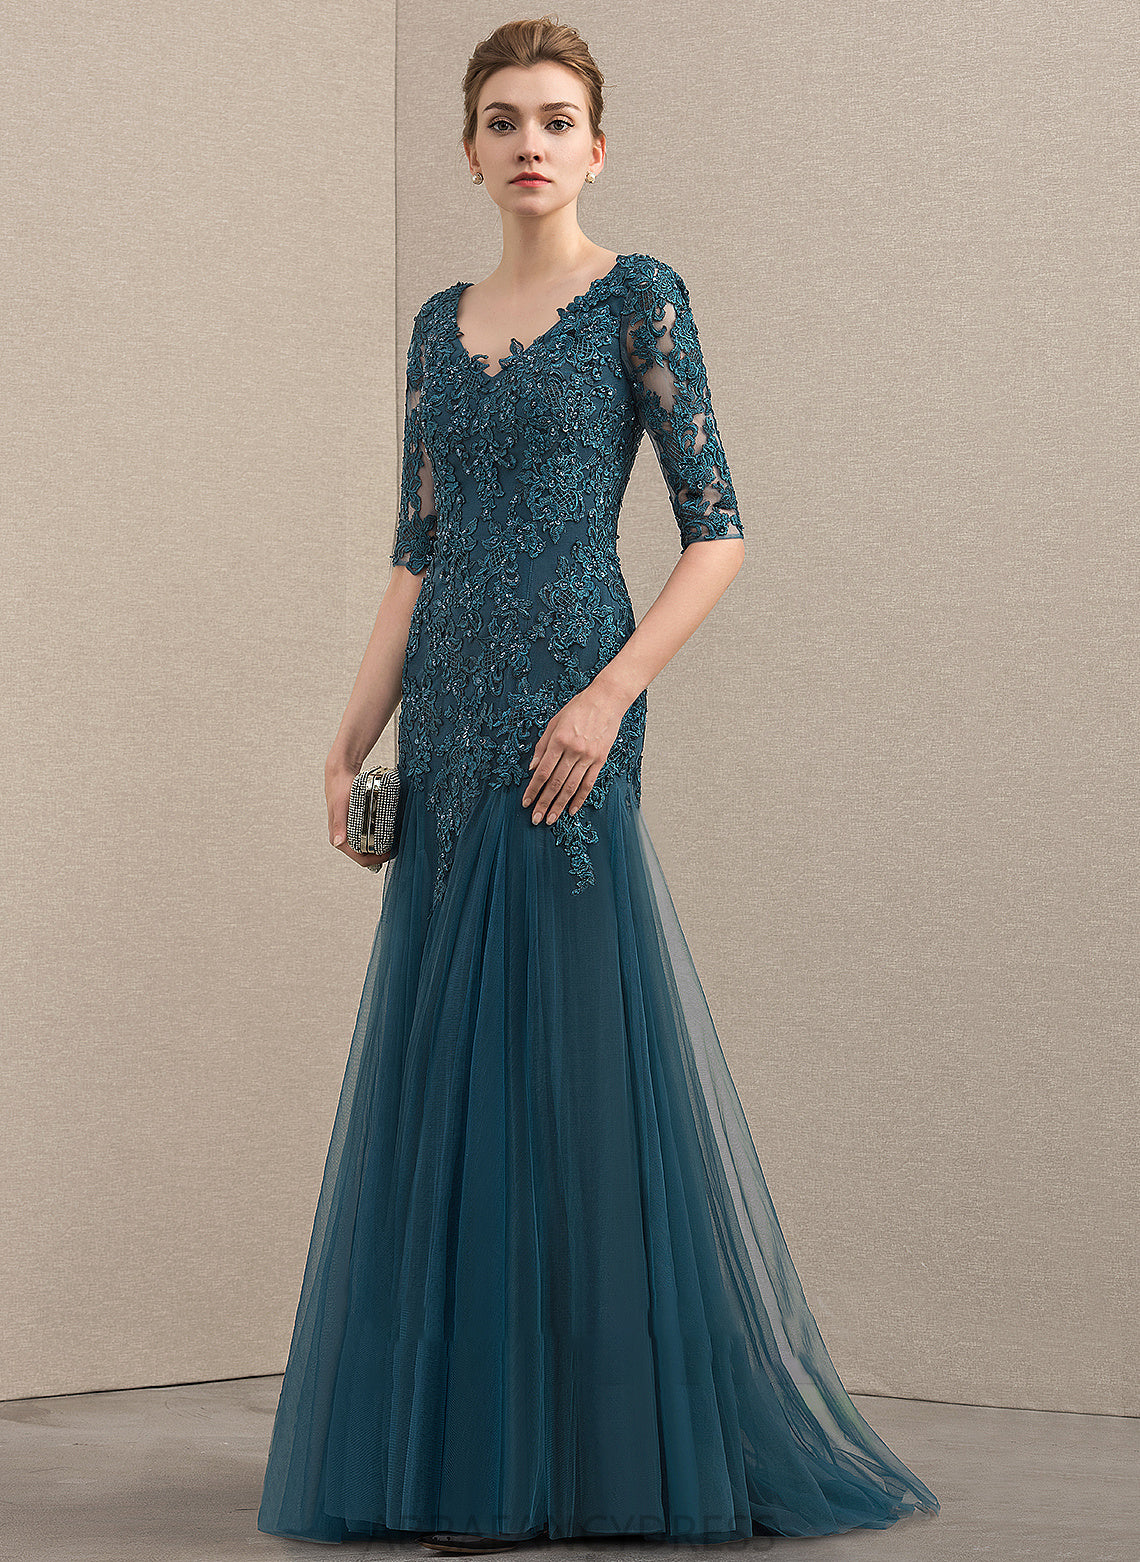 Train Trumpet/Mermaid Lace Sequins Kathleen Tulle of the Mother Bride With Sweep Beading V-neck Mother of the Bride Dresses Dress